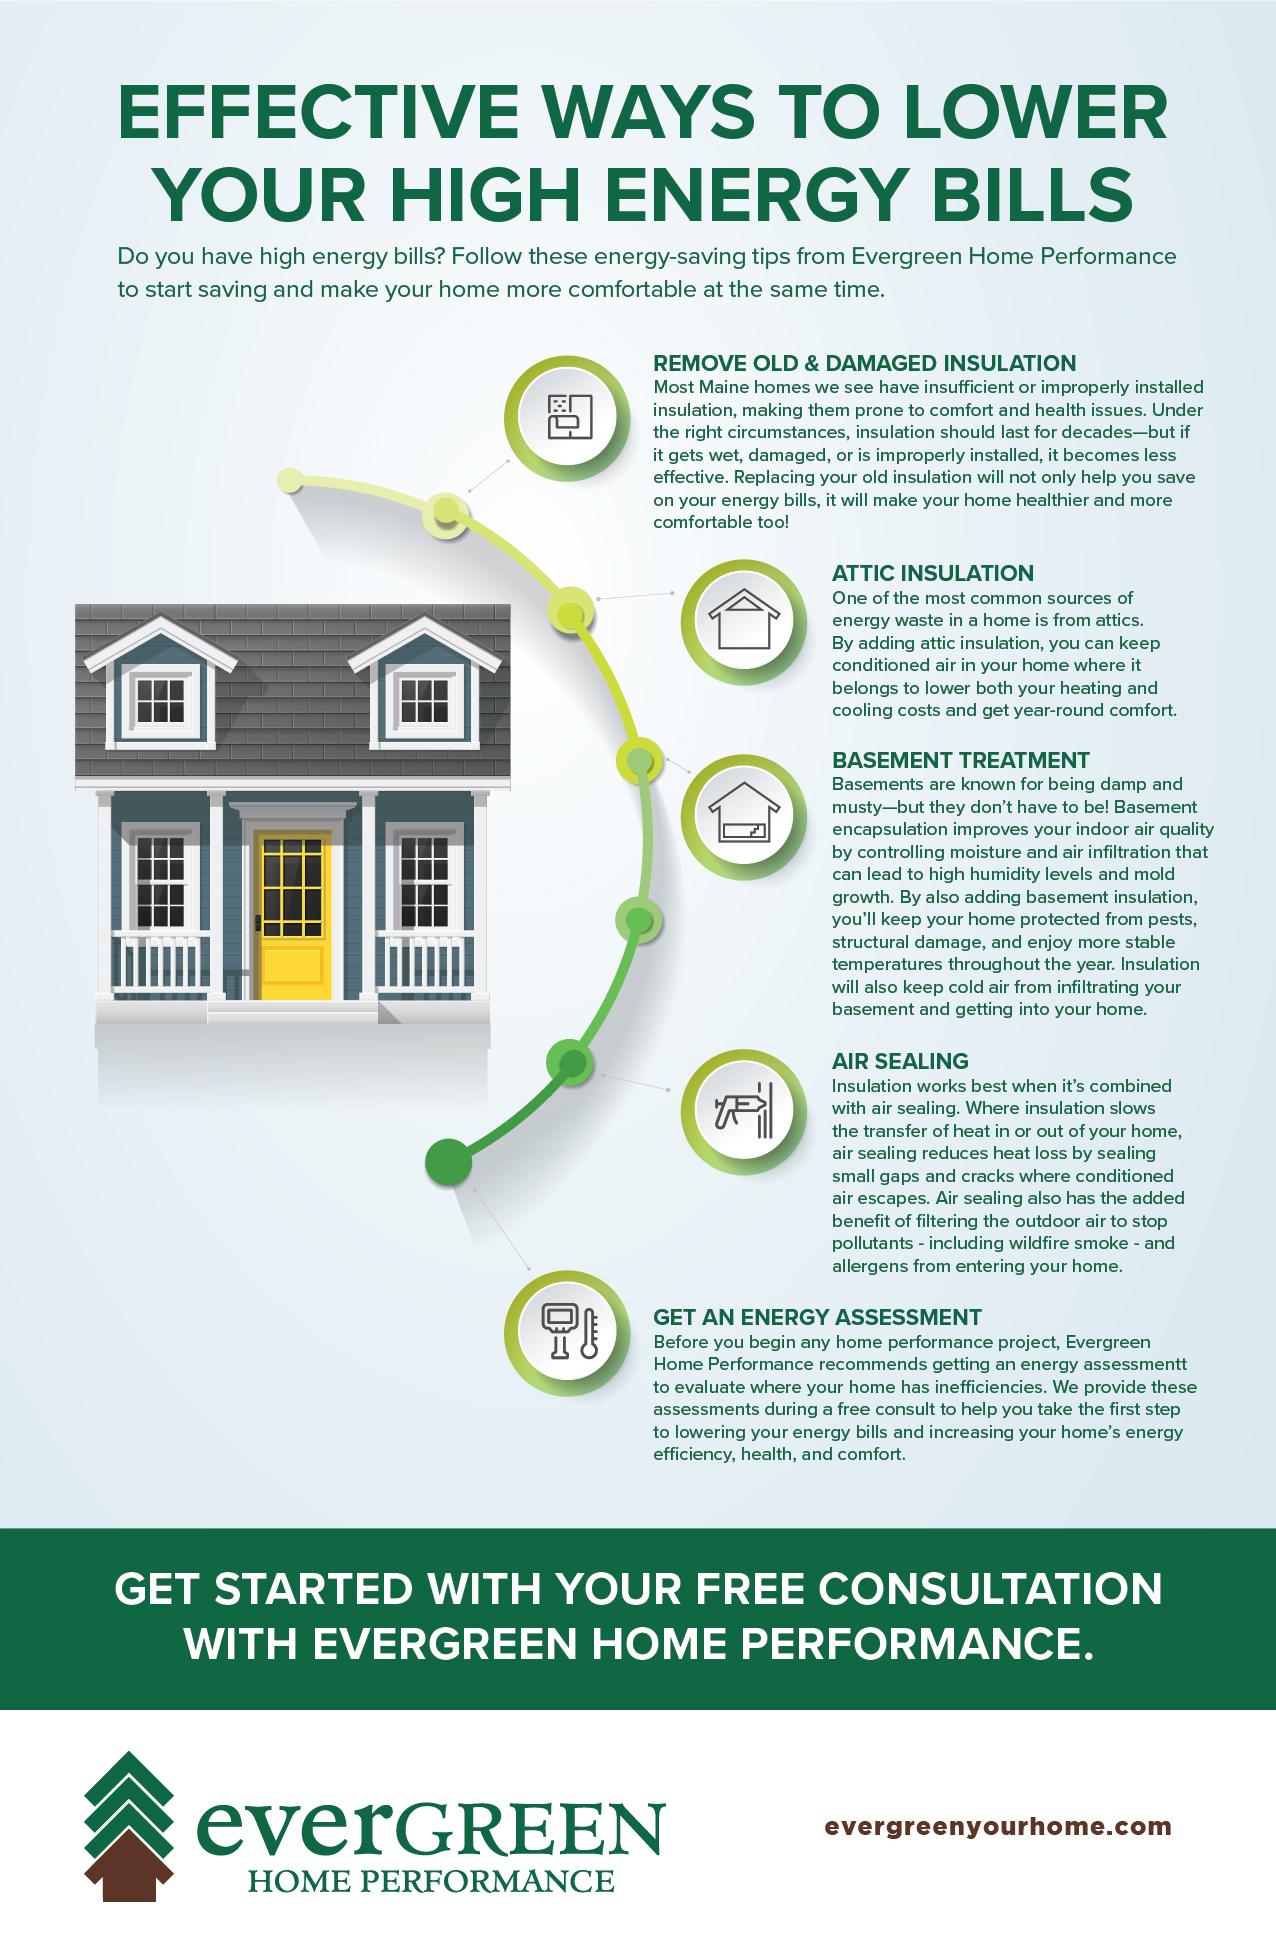 Effective Ways to Lower Your High Energy Bills infographic